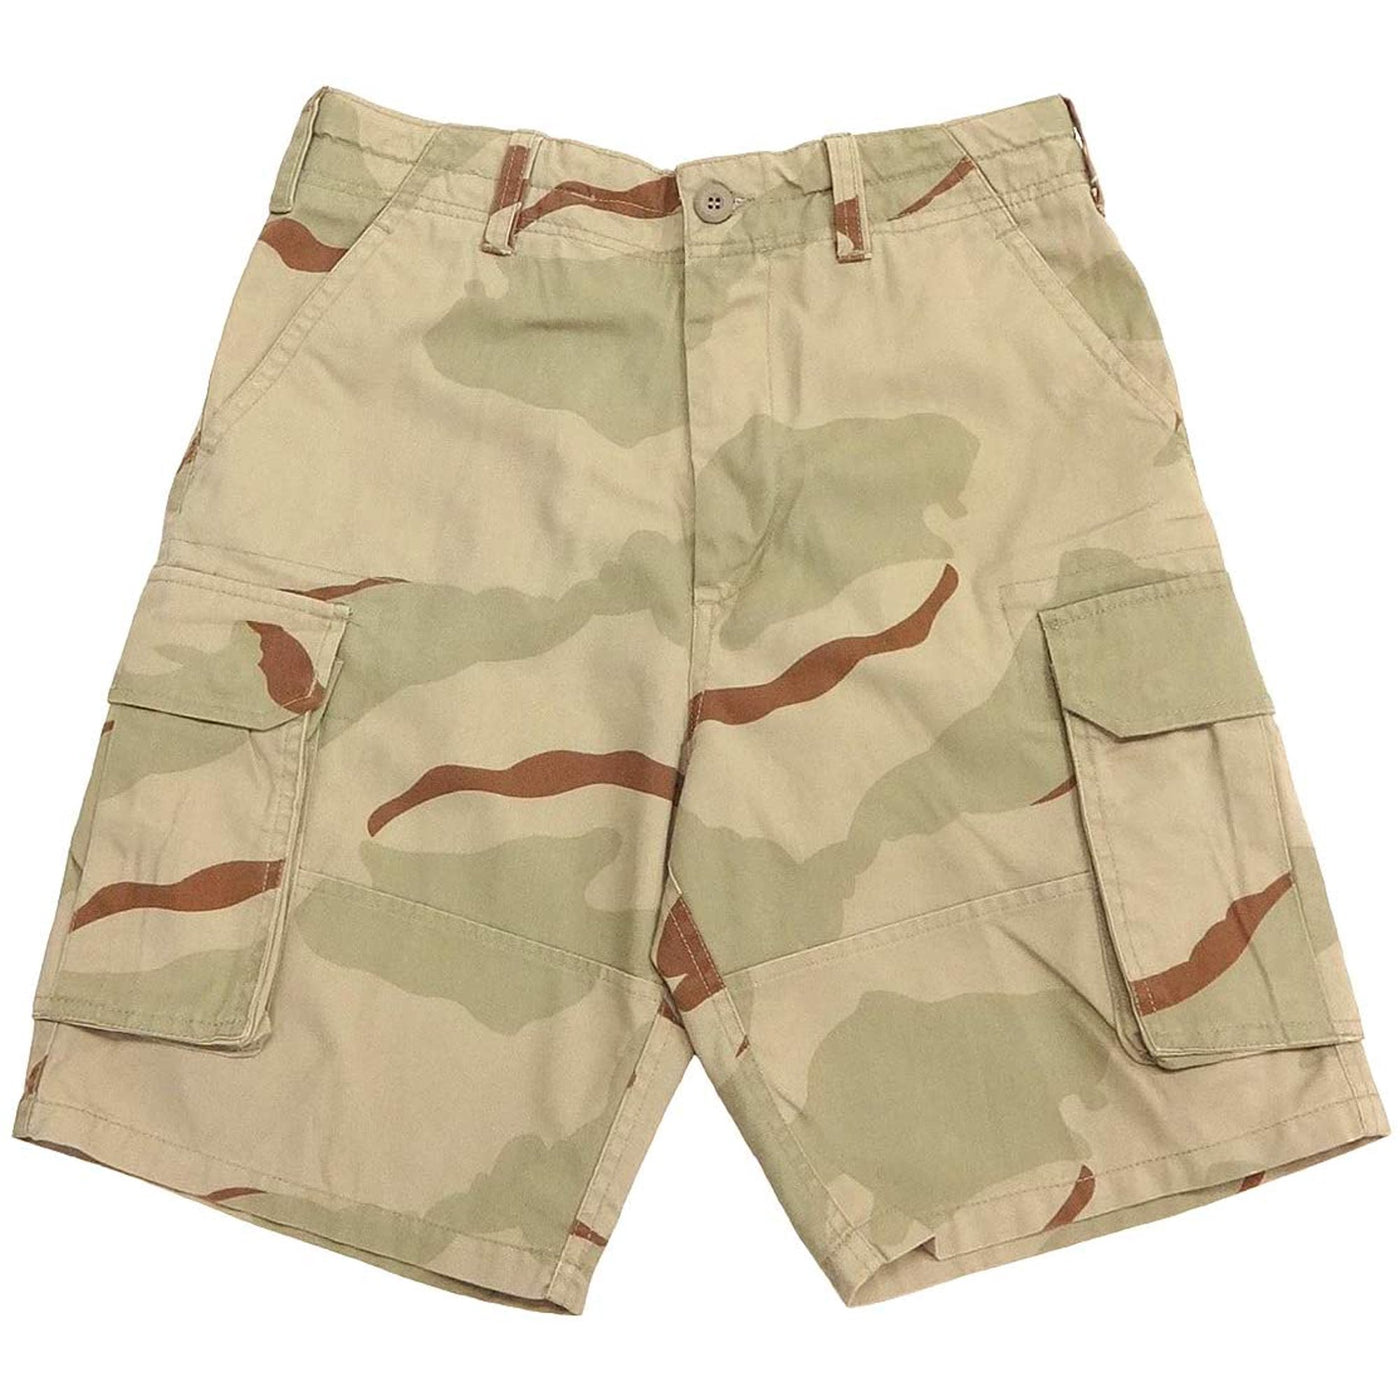 Rothco Vintage Paratrooper Cargo Shorts